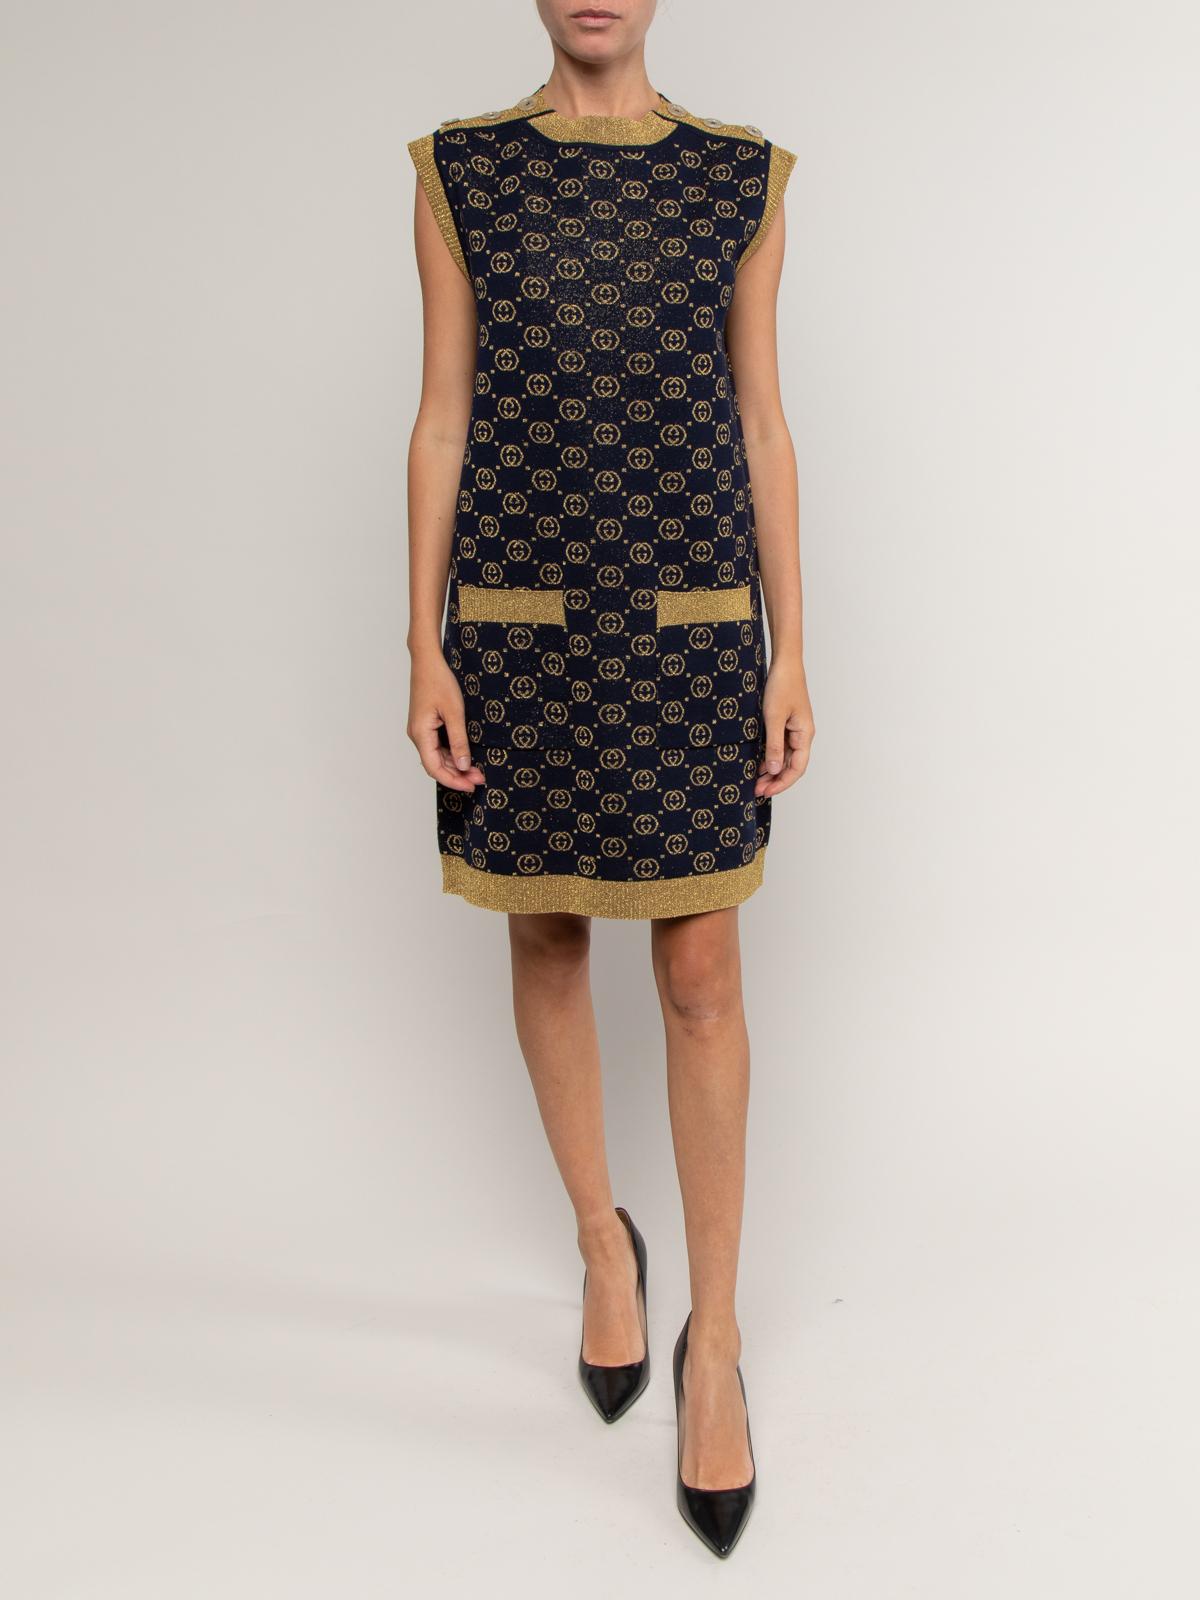 Editor\\\'s Note Cosy up in this used Gucci dress. Invest in designer resale knitwear to expand your collection of luxury consignment used designer clothing whilst staying snug. Featuring the GG print and gold accents, this second hand Gucci dress